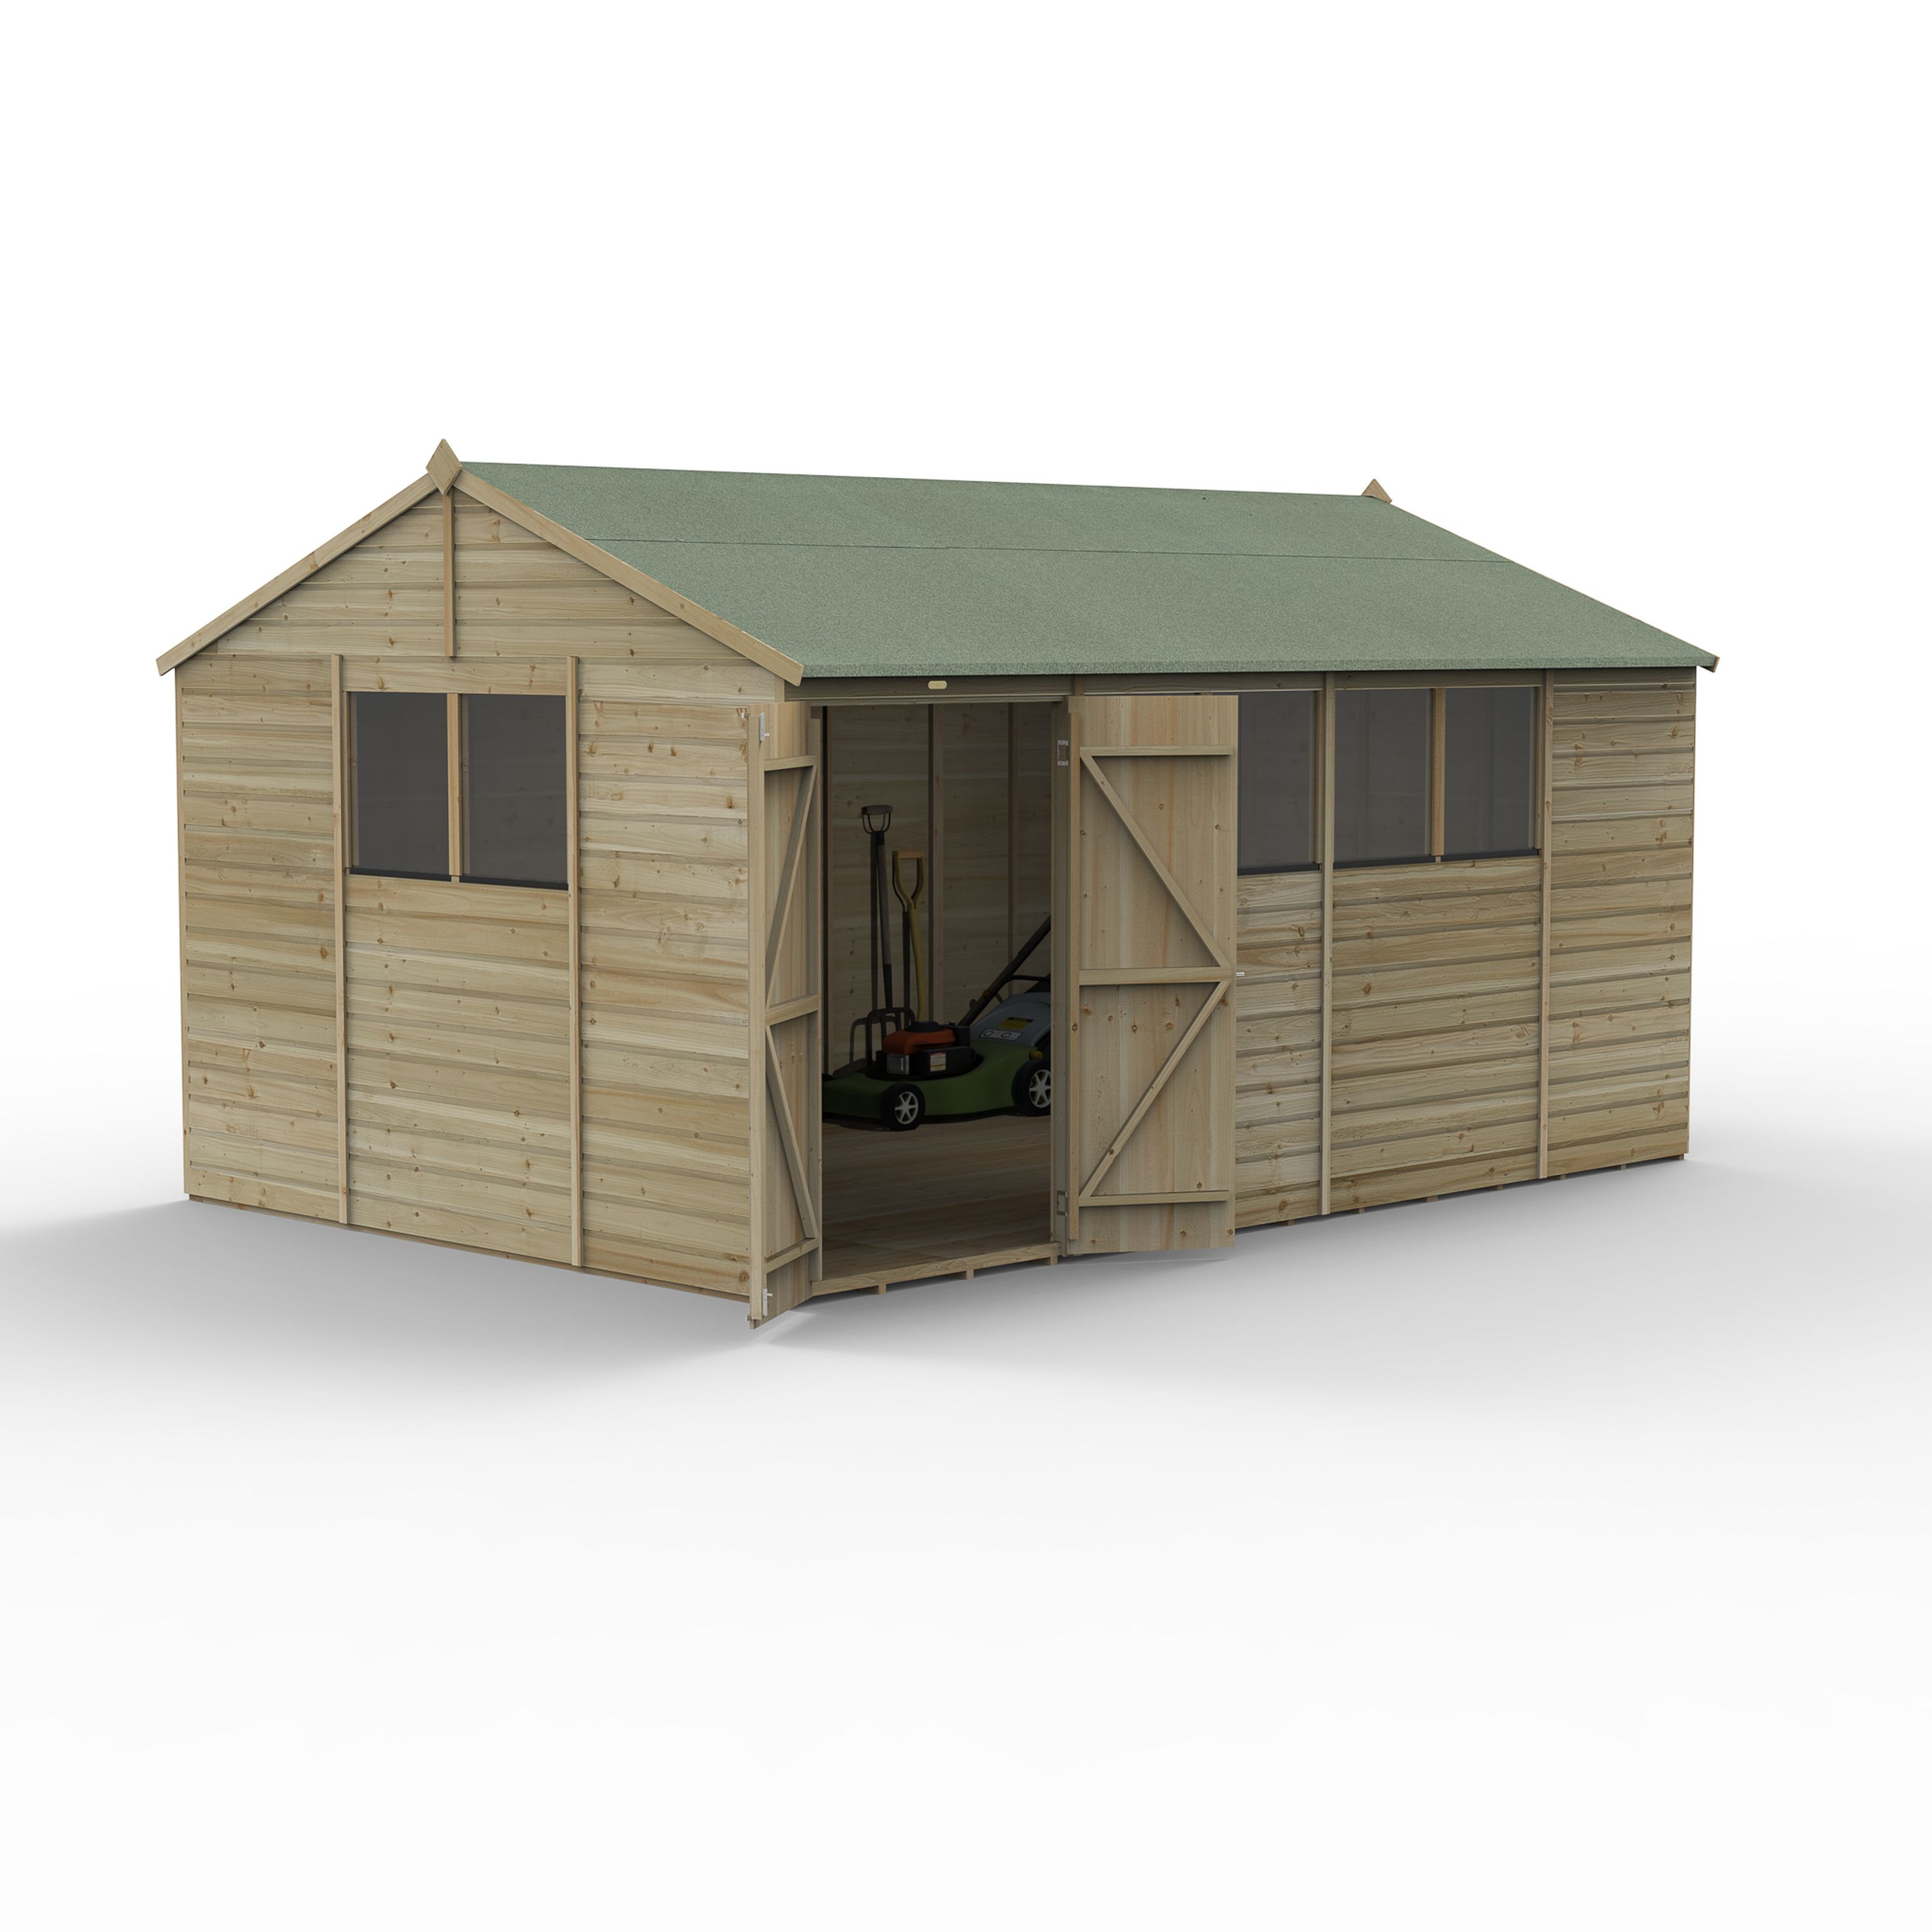 Forest Garden Beckwood 10x15 ft Reverse apex Natural timber Wooden 2 door Shed with floor & 6 windows (Base included) - Assembly not required